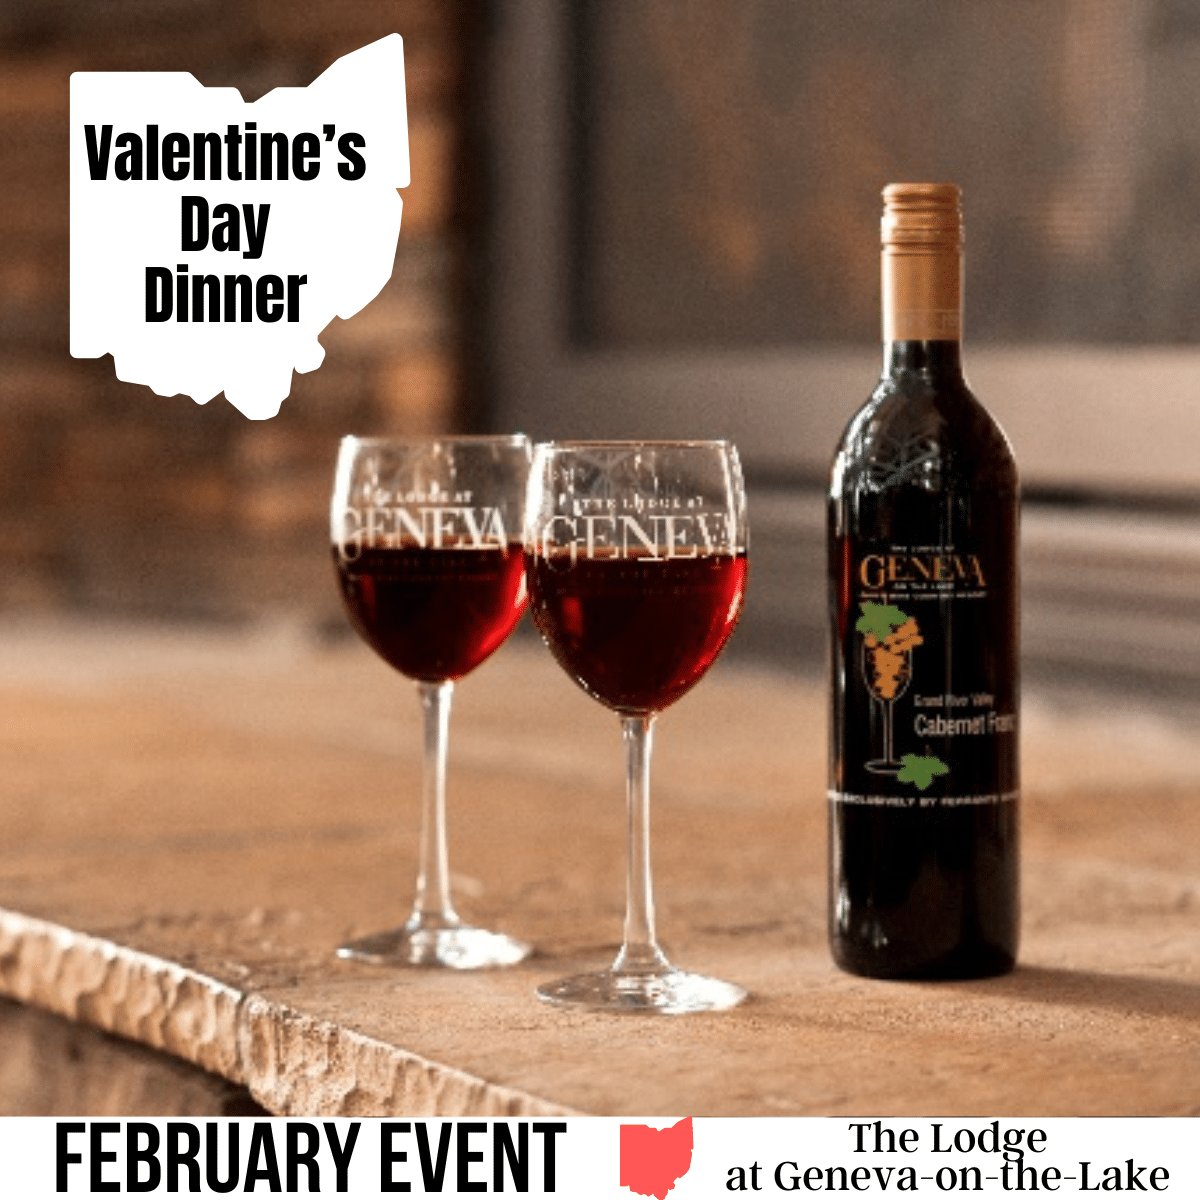 square image with a photo of a wine bottle and two glasses of red wine. A white map of Ohio at the top has the text Valentine's Day Dinner and a white strip across the bottom has the text February Event, The Lodge at Geneva-on-the-Lake